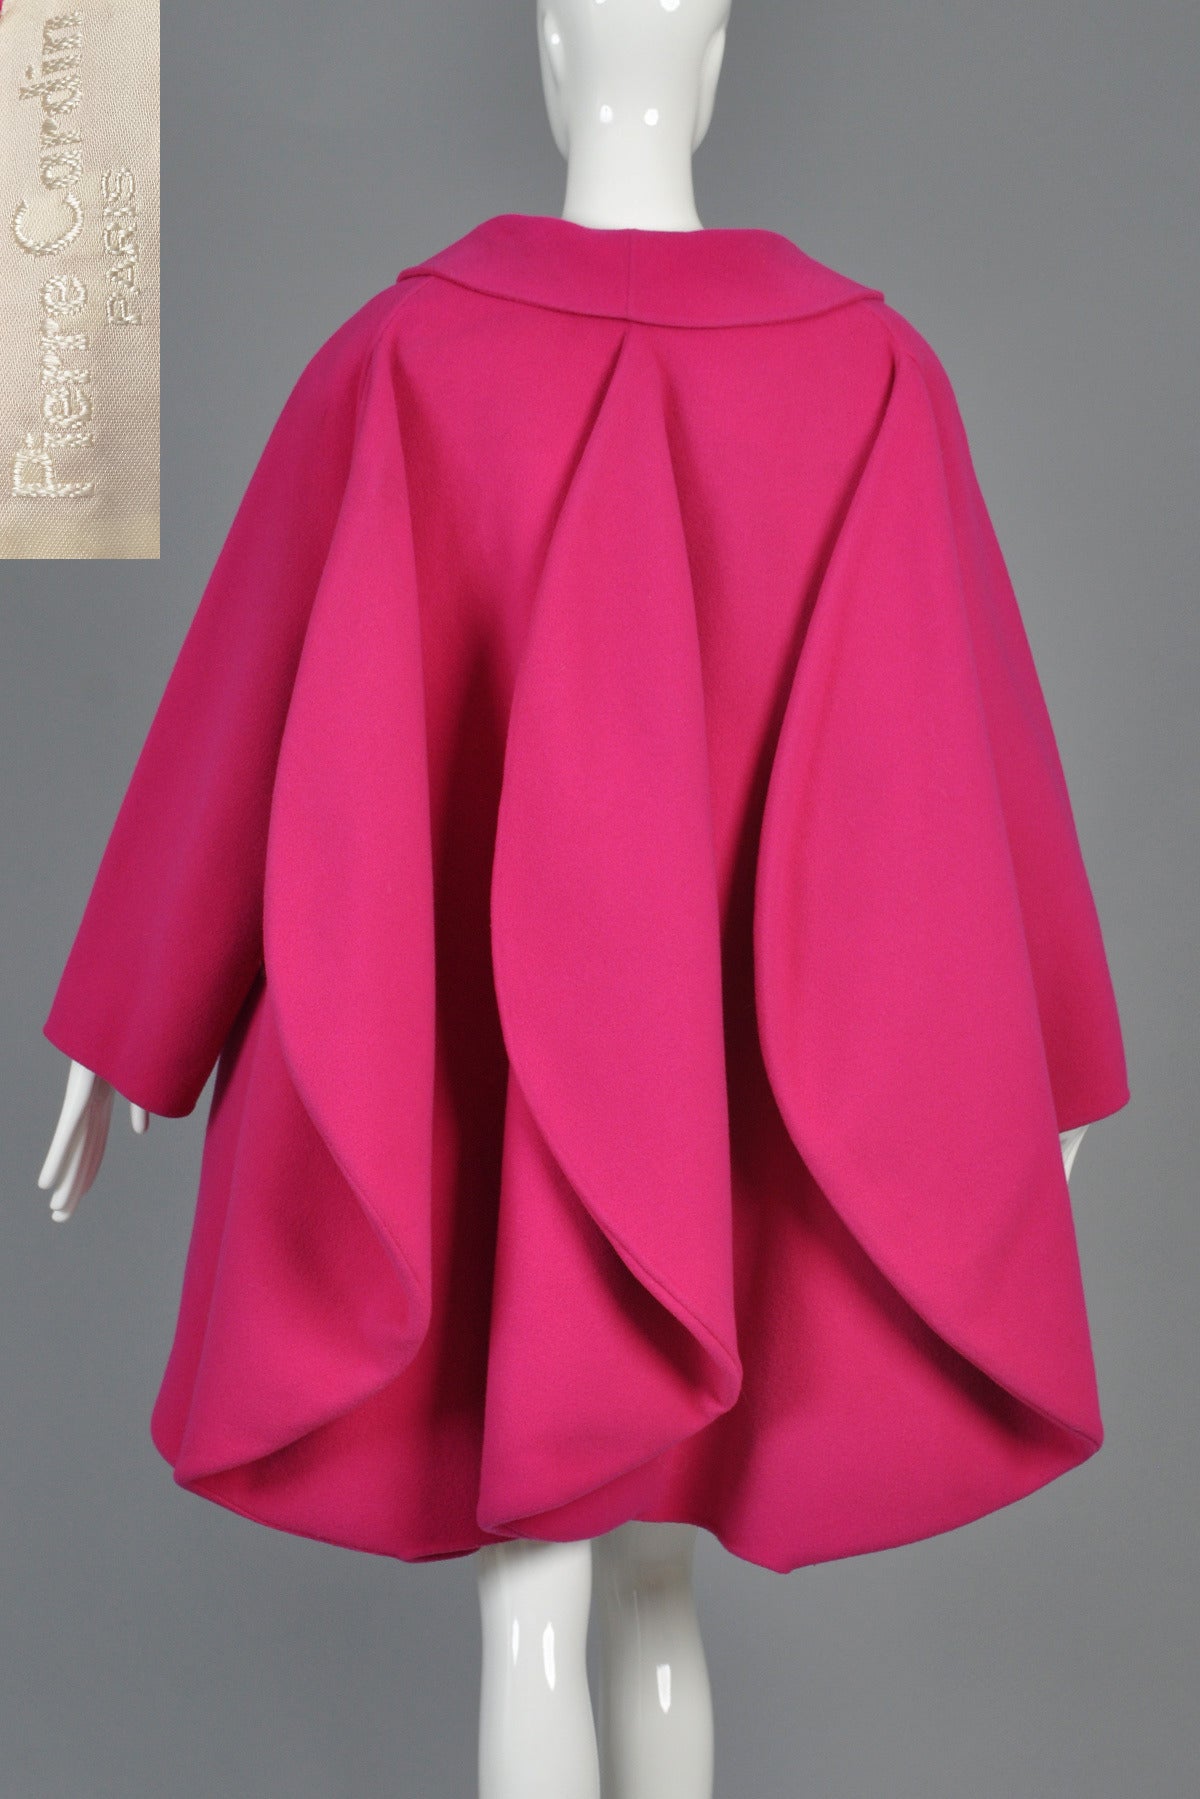 Iconic 1987 Pierre Cardin Haute Couture Fin-Backed Coat For Sale 3